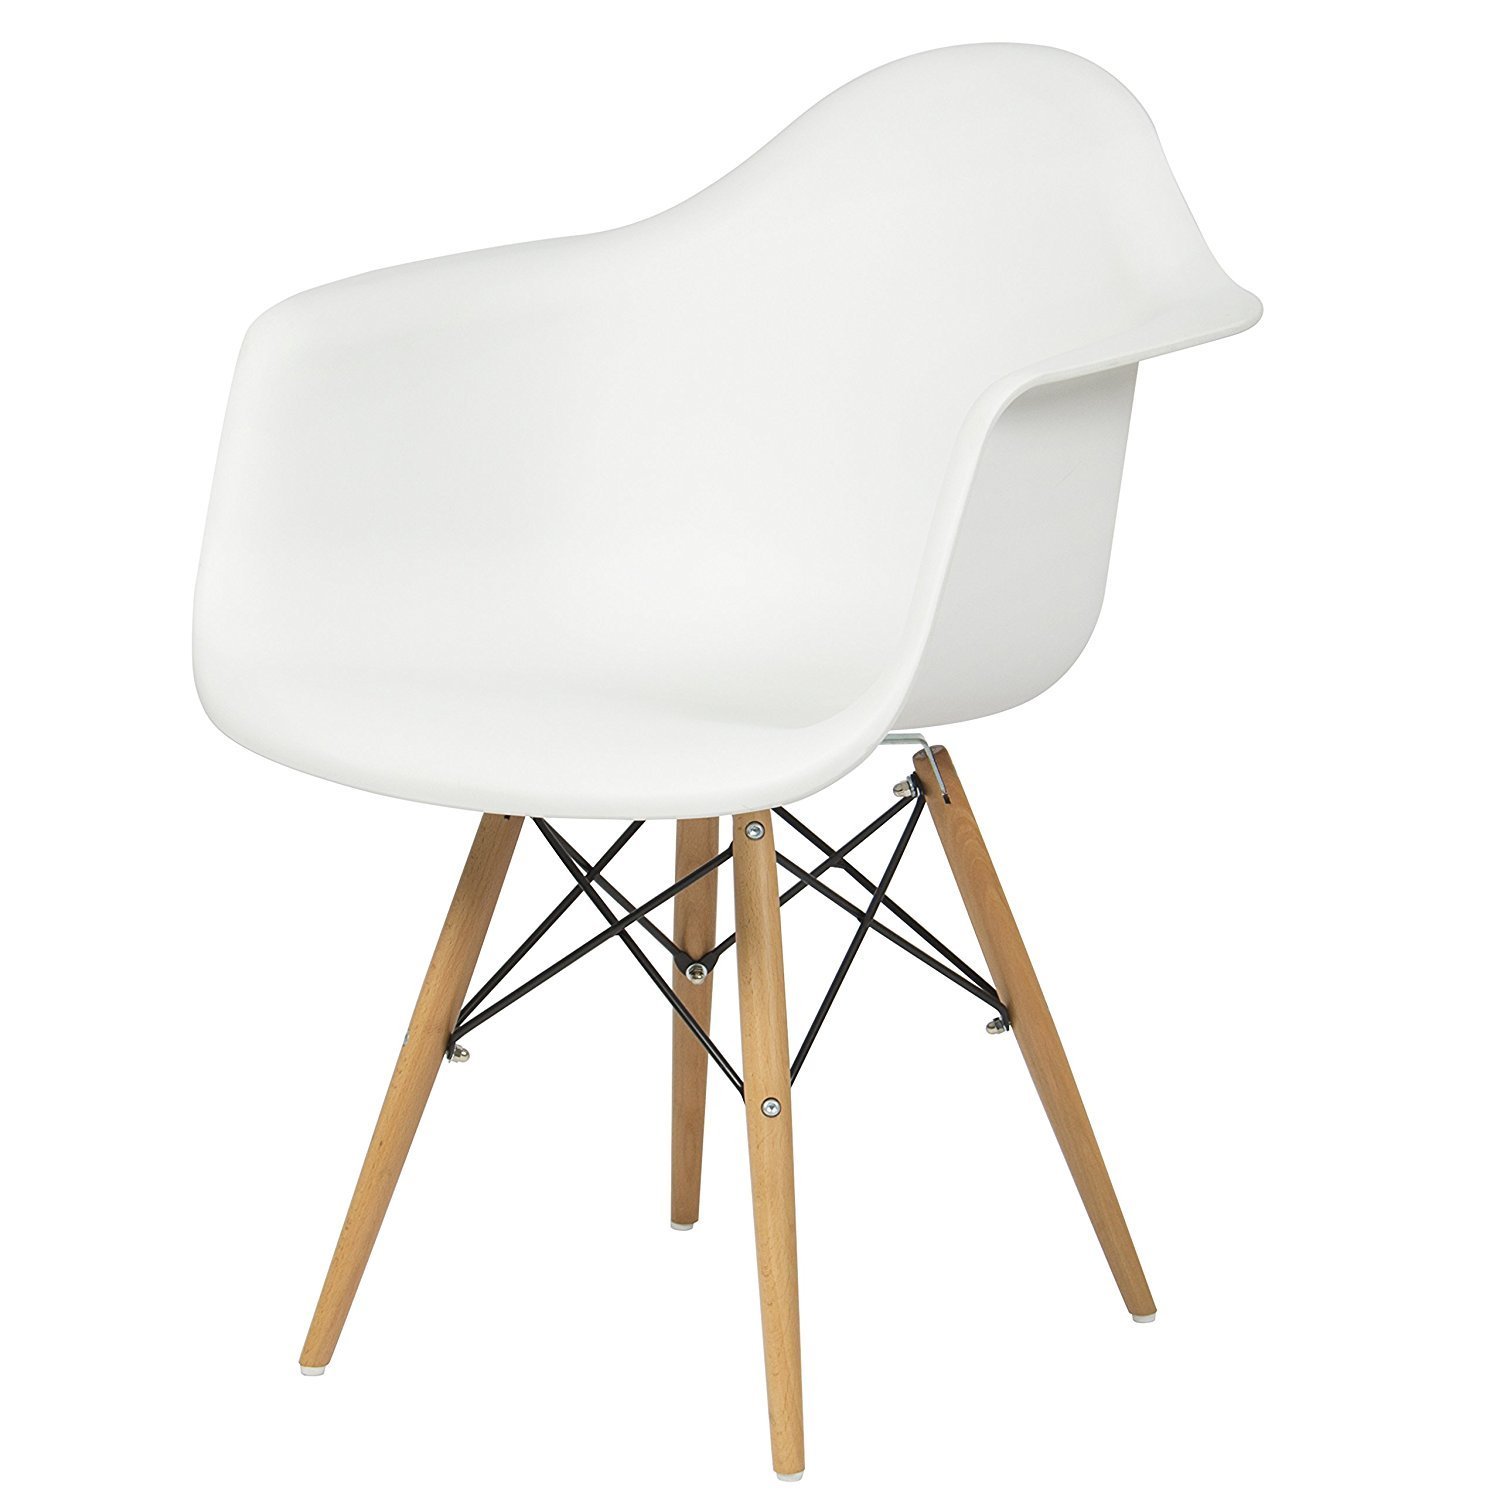 Best Choice Products Eames Style Armchair Mid Century Modern Molded Plastic Shell Arm Chair - Plastic Chairs